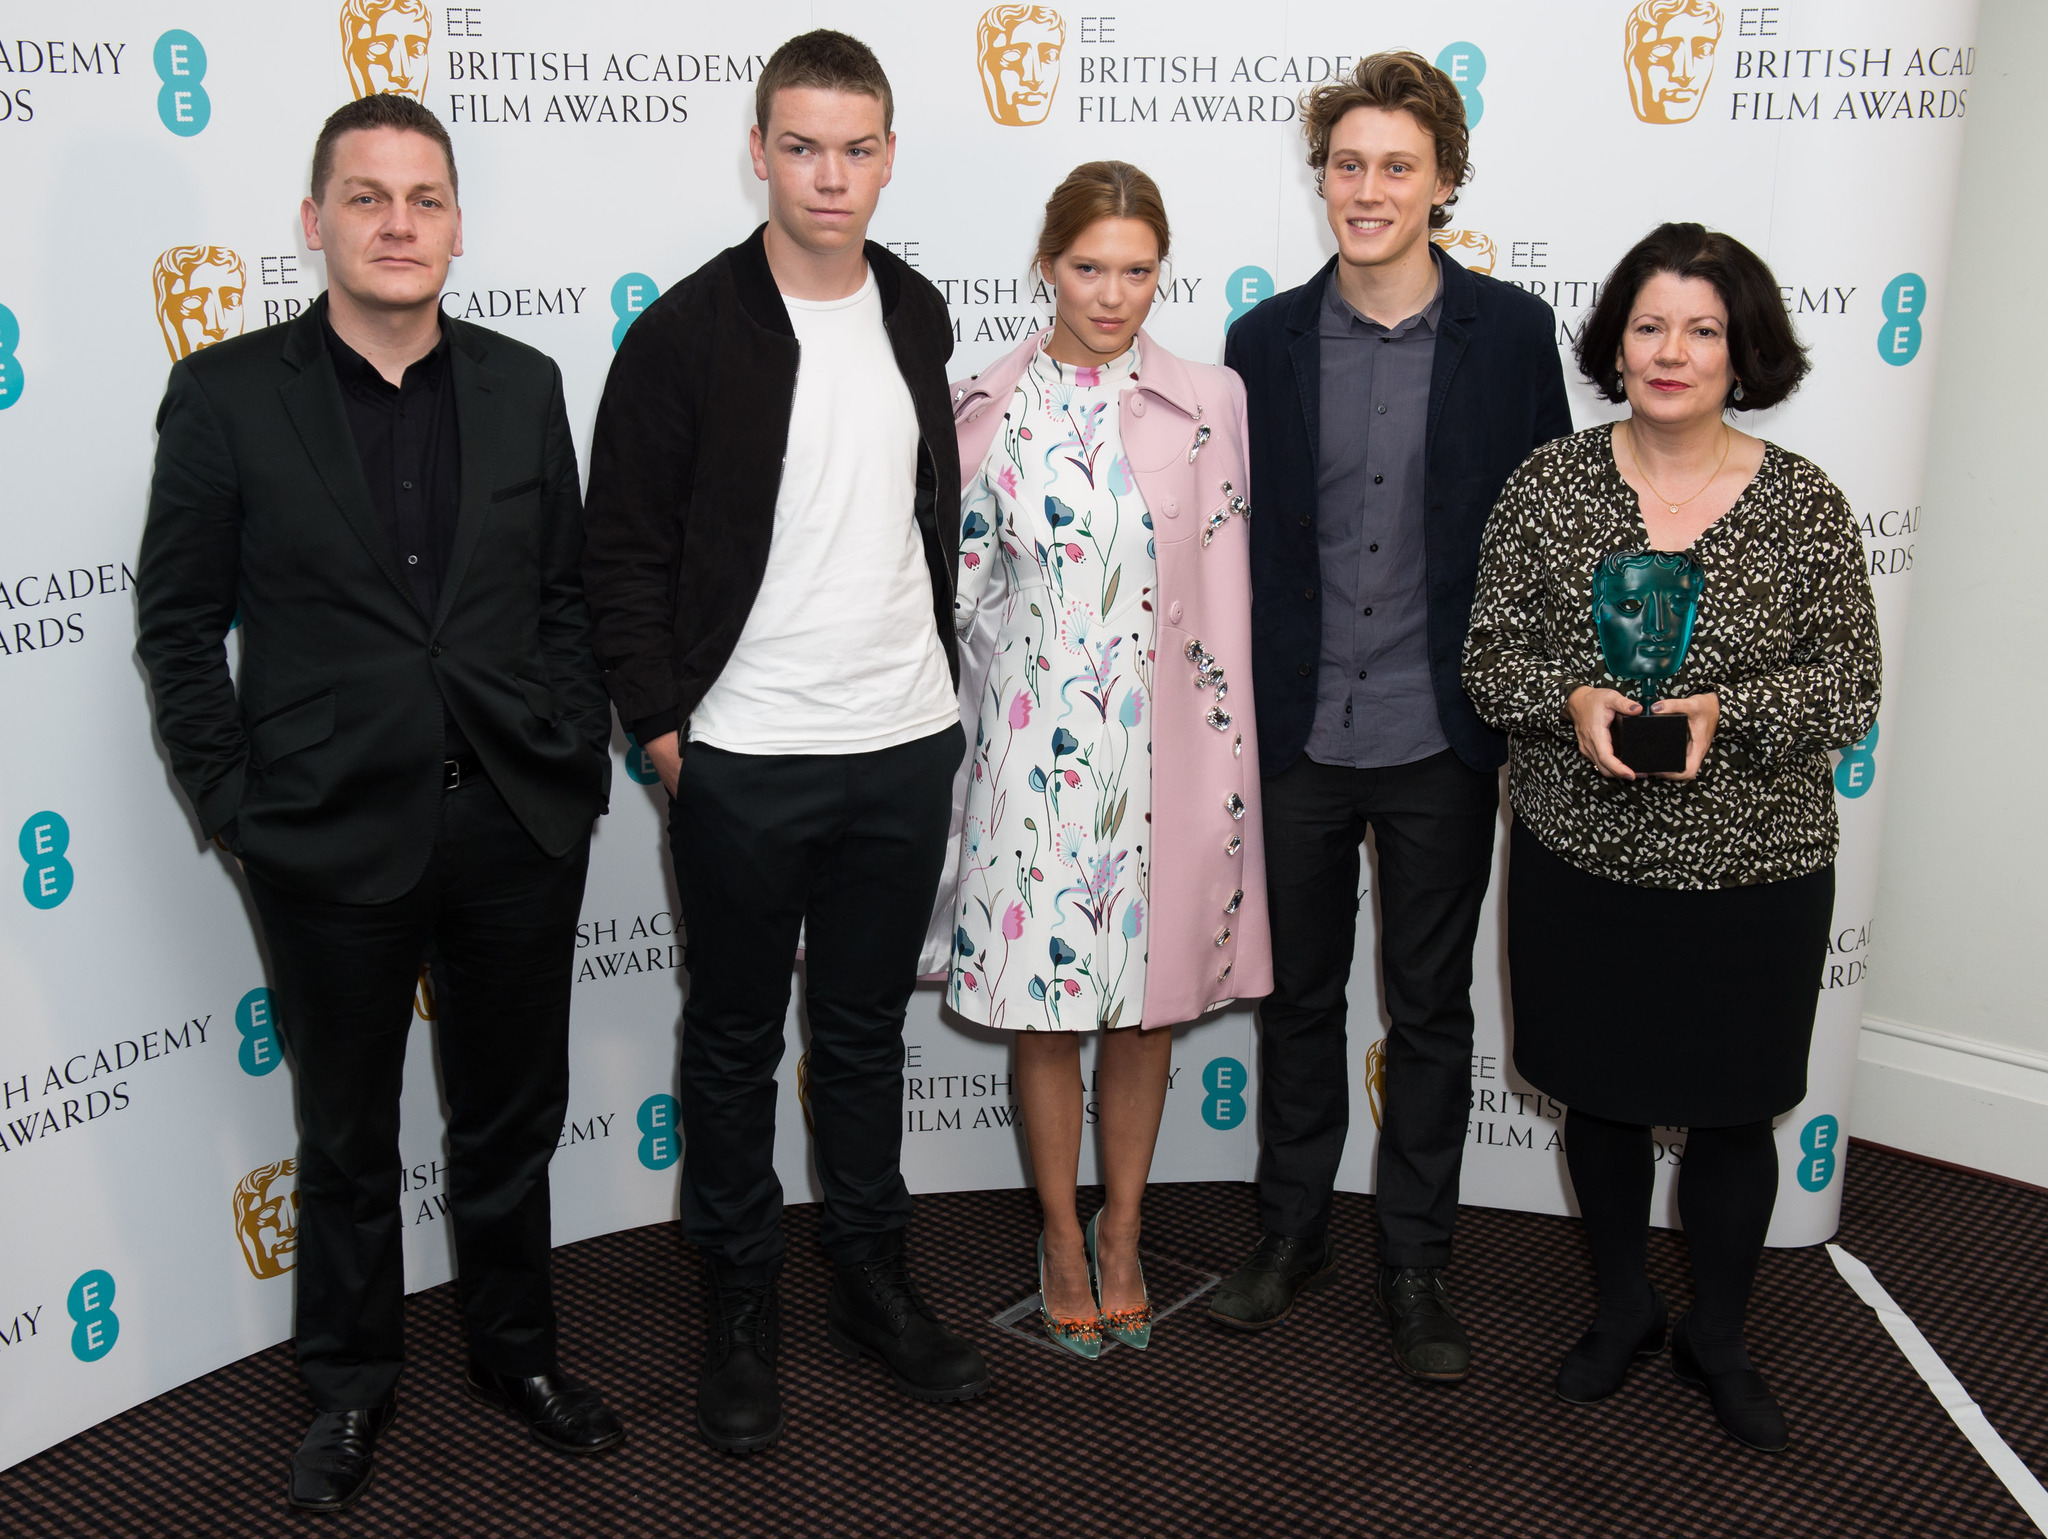 Spencer McHugh, Director of Brand at EE, Will Poulter, Lea Seydoux, George MacKay and Pippa Harris, EE Rising Star Deputy Chair, attend the nominations photocall for the EE Rising Star award at BAFTA on January 6, 2014 in London, England.